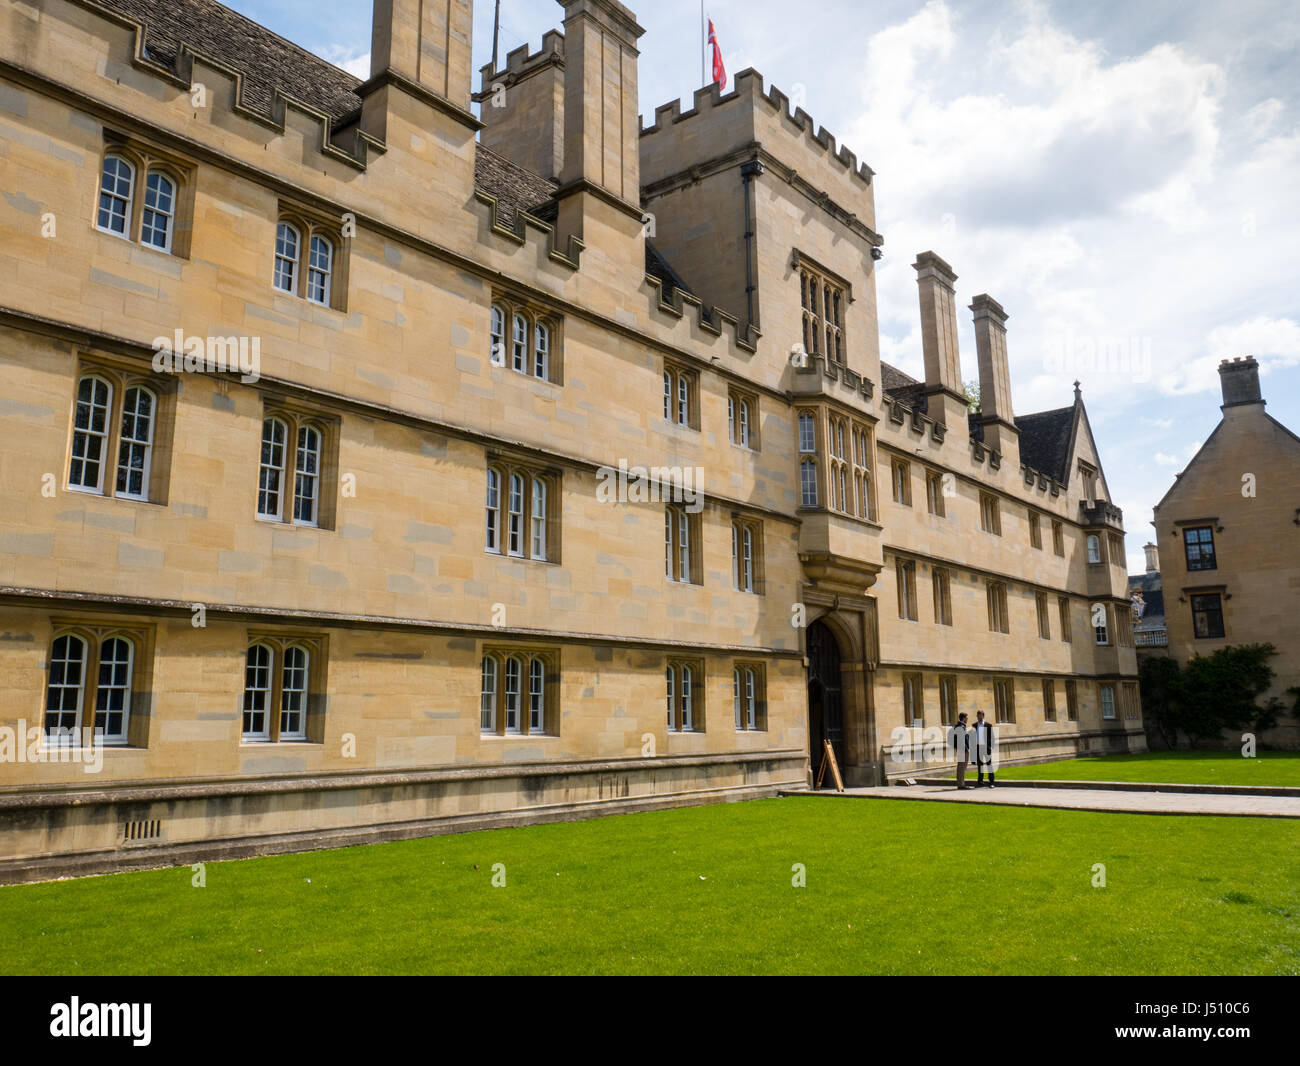 Wadham College, University of Oxford, Oxford, Oxfordshire, England, UK, FR. Banque D'Images